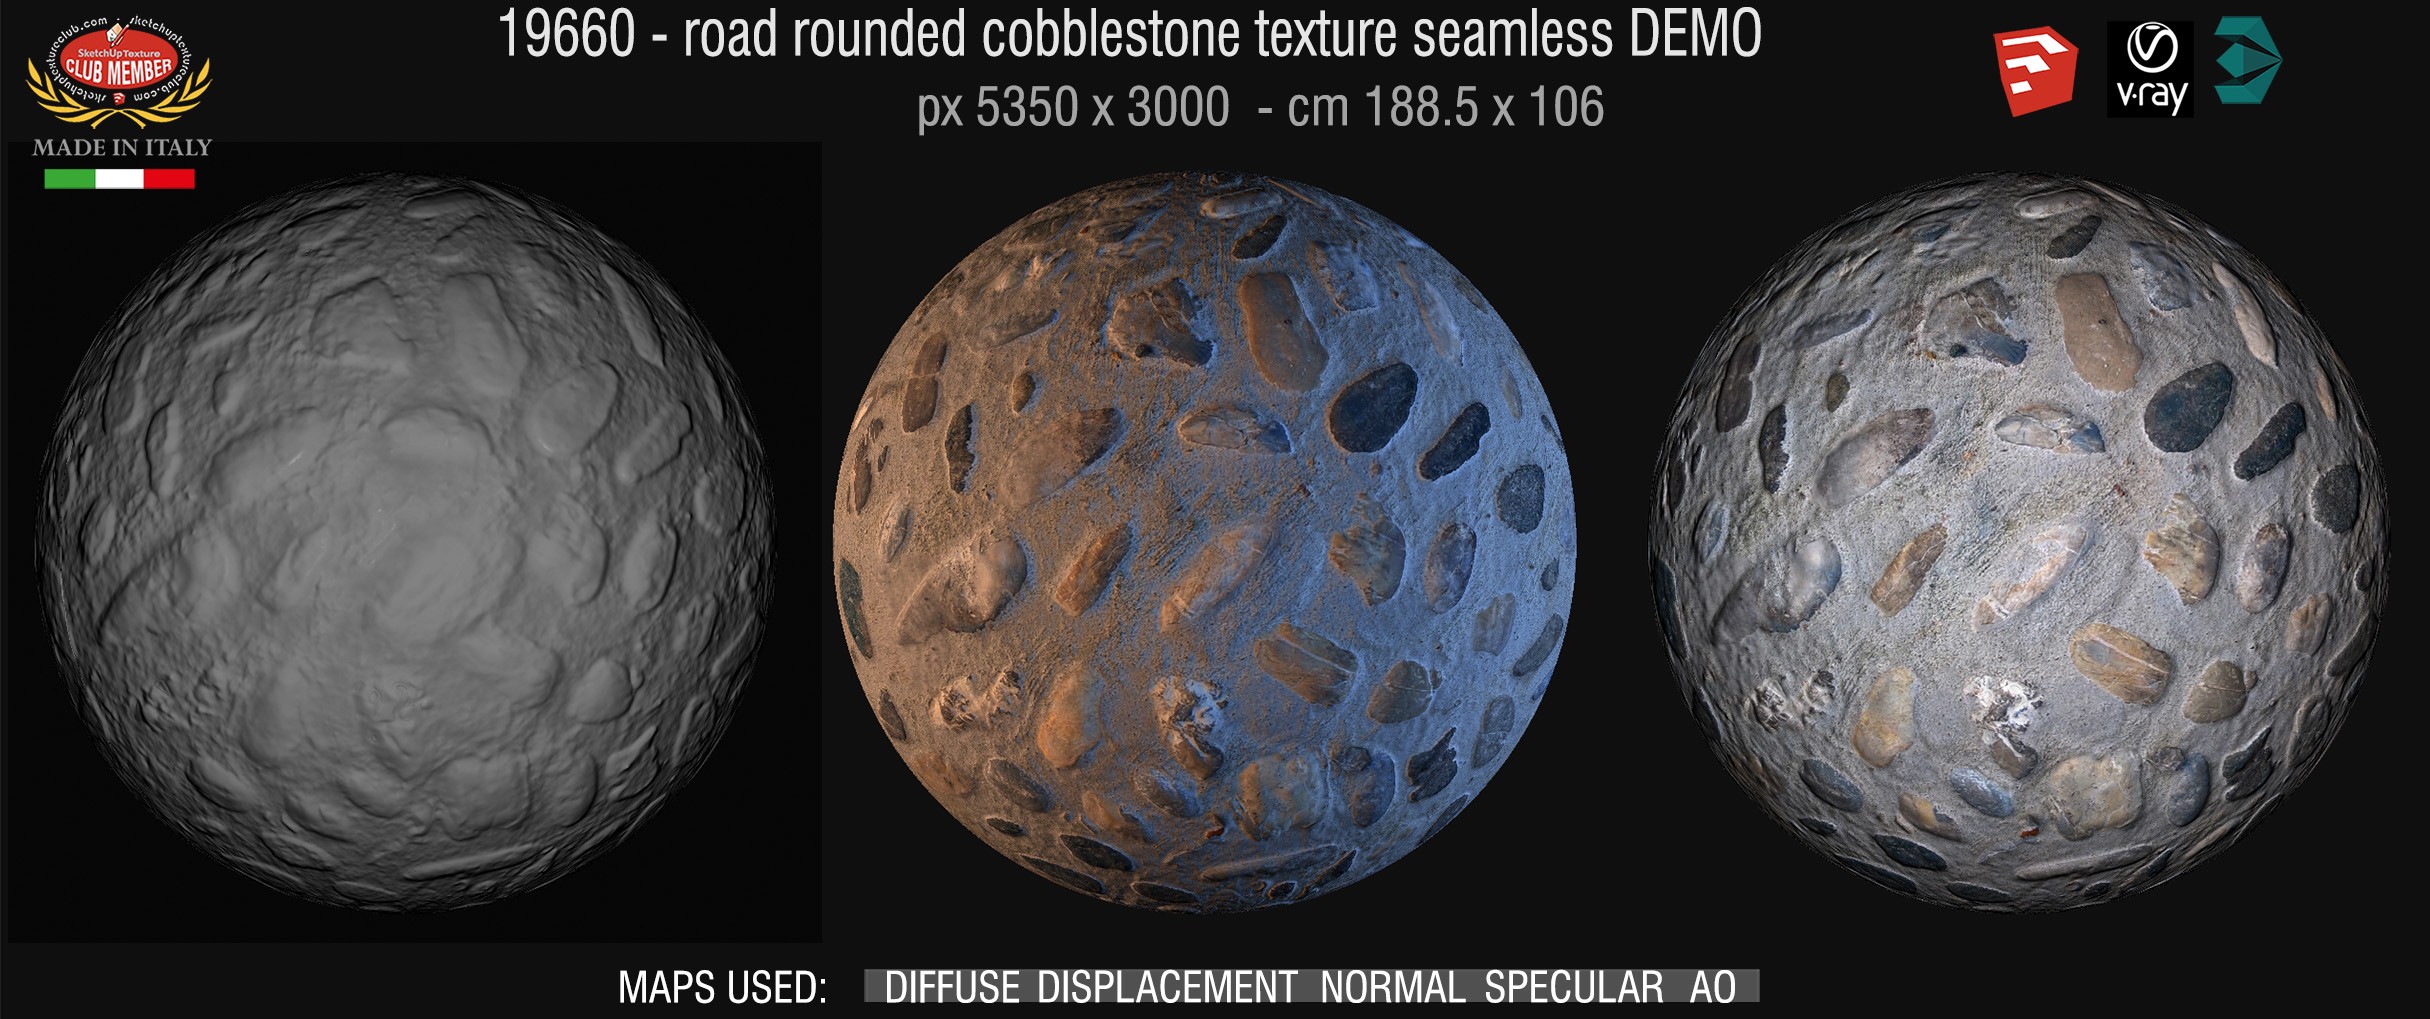 19660 Road rounded cobblestone texture seamless + maps DEMO